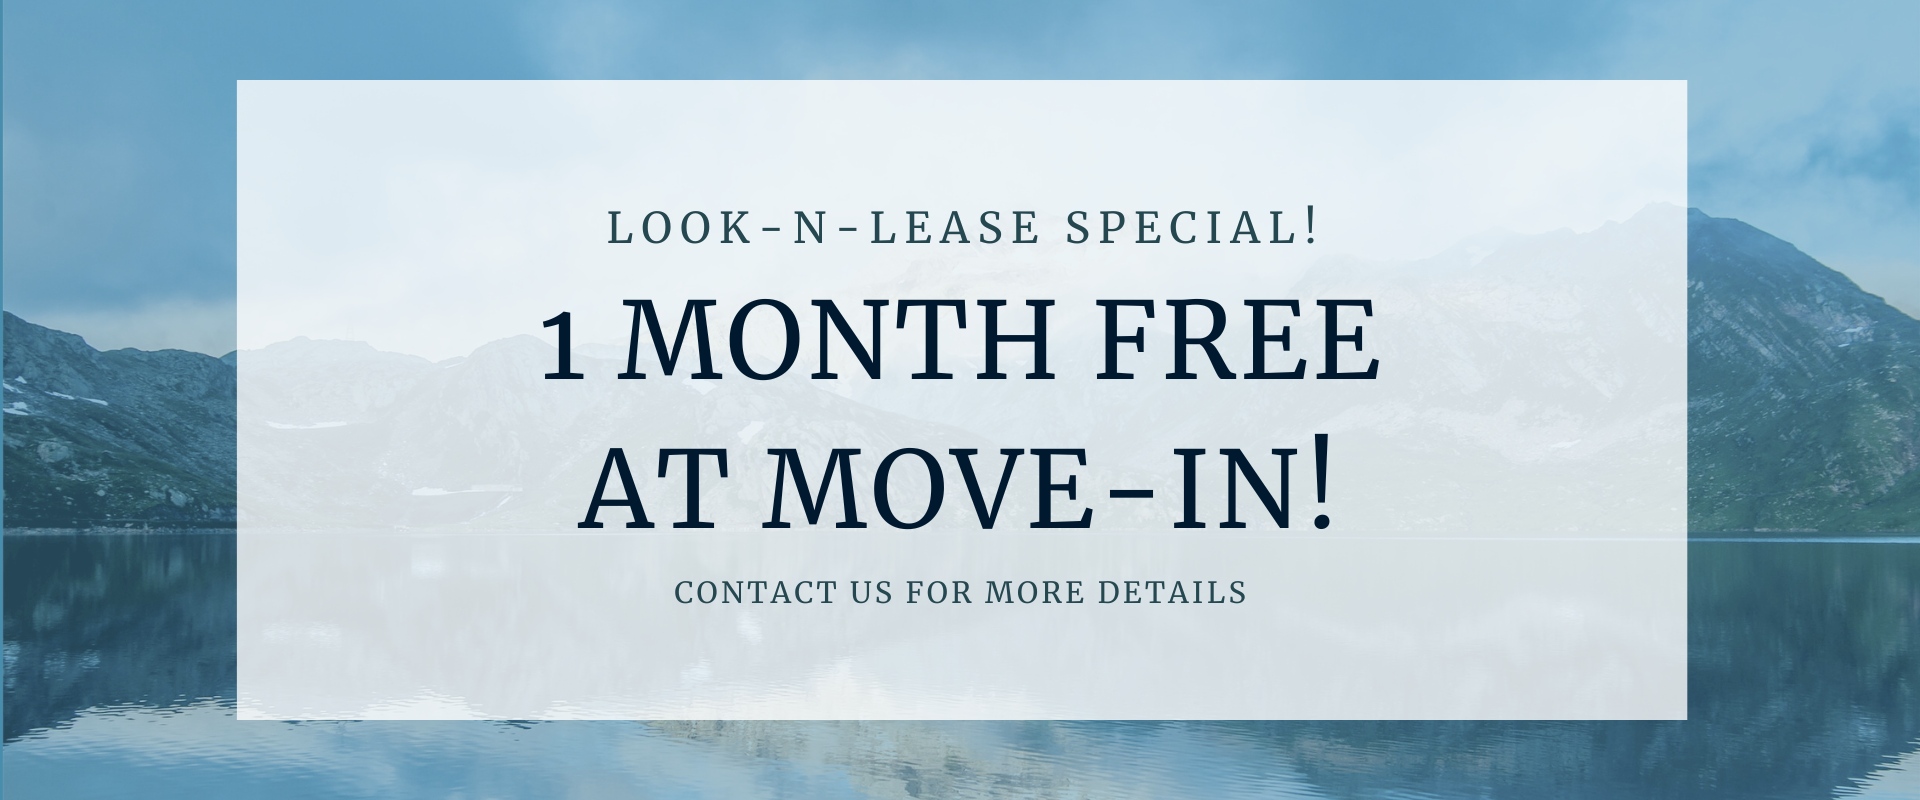 Look-n-lease special   1 month free at move-in!   Contact us for more details